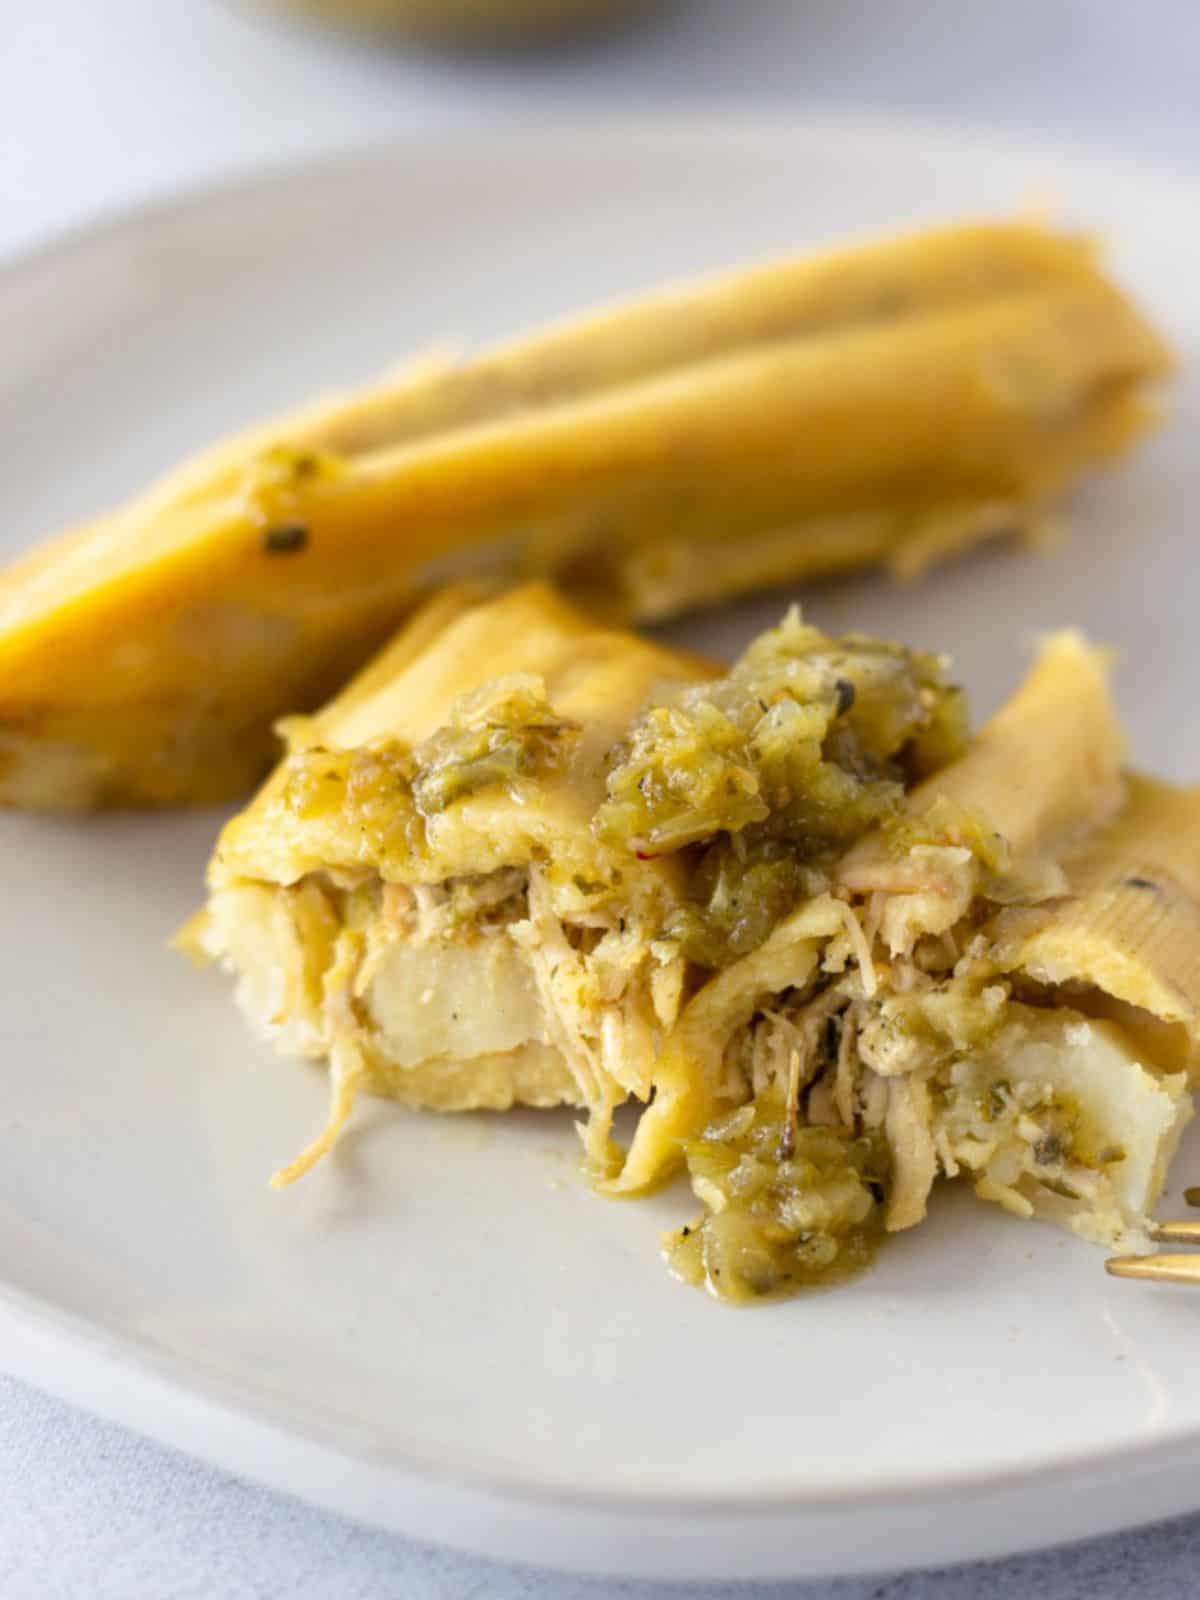 Chicken tamale on a plate, sliced open to show filling and topped with green salsa.